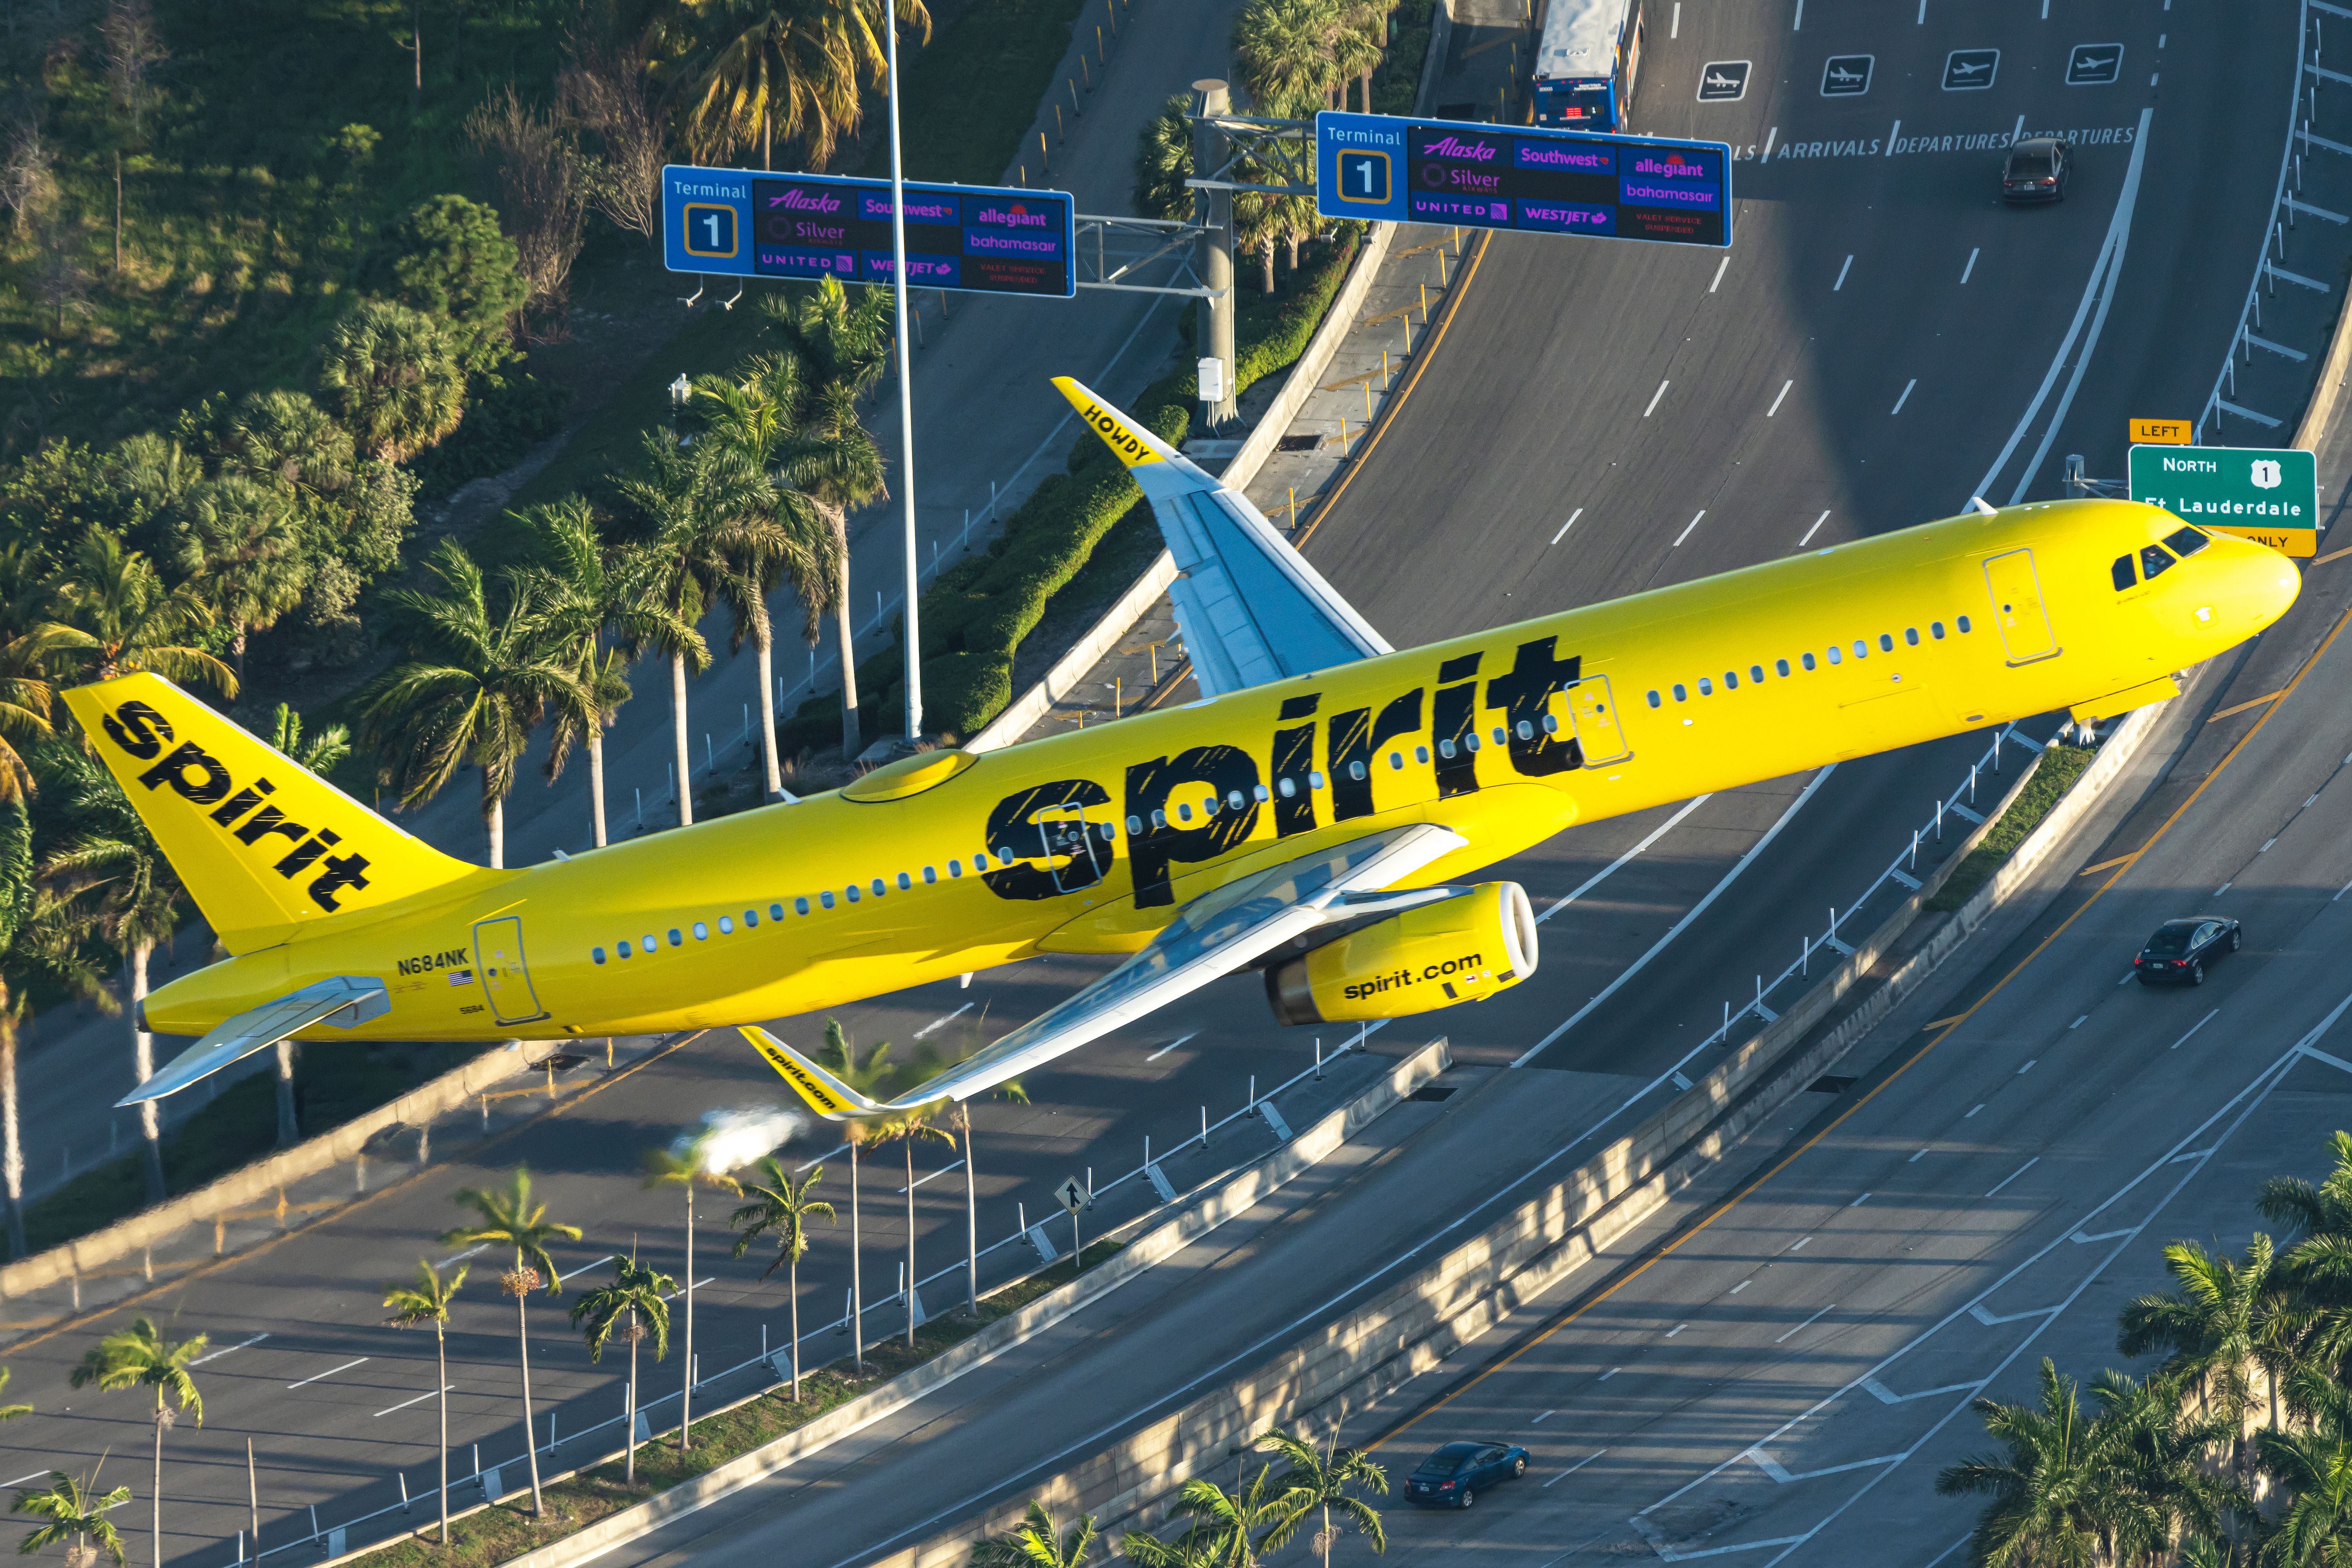 A Spirit Airlines Airbus A321-231 just after take off.